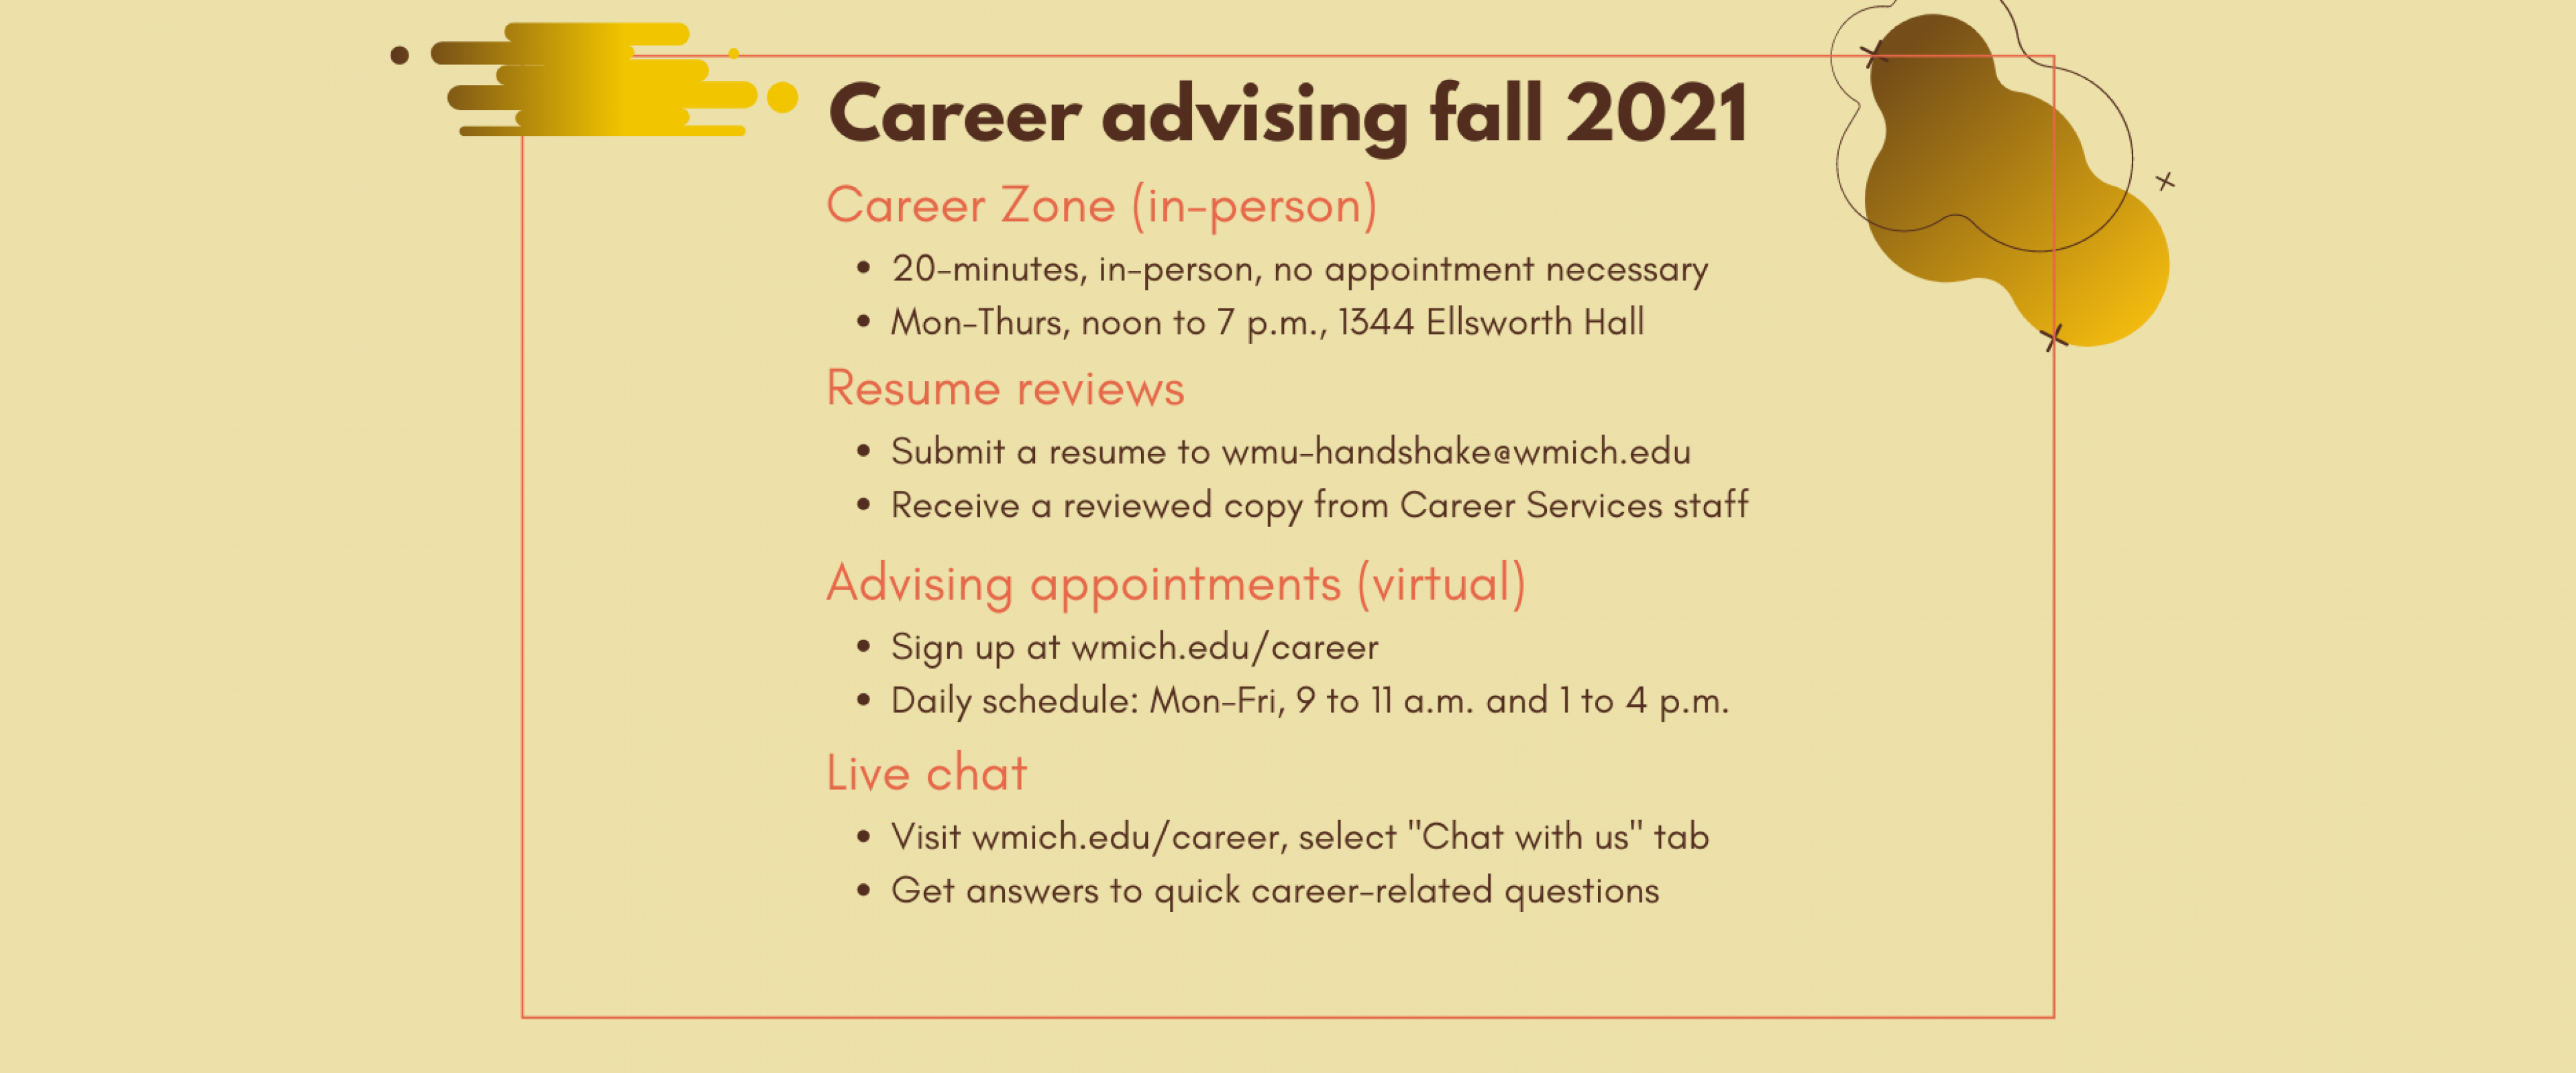 Career advising fall 2021: 1) Career Zone is 20 minute sessions, in-person, no appointment necessary; open Monday through Thursday, noon to 7 p.m., 1344 Ellsworth Hall. 2) Resume reviews: submit a resume to wmu-handshake@wmich.edu; receive a reviewed copy from Career Services staff. 3) Virtual advising appointments: sign up at wmich.edu/career; daily schedule is Monday through Friday, 9 to 11 a.m. and 1 to 4 p.m. 4) Live chat: visit wmich.edu/career, select "Chat with us" tab for answers to career questions